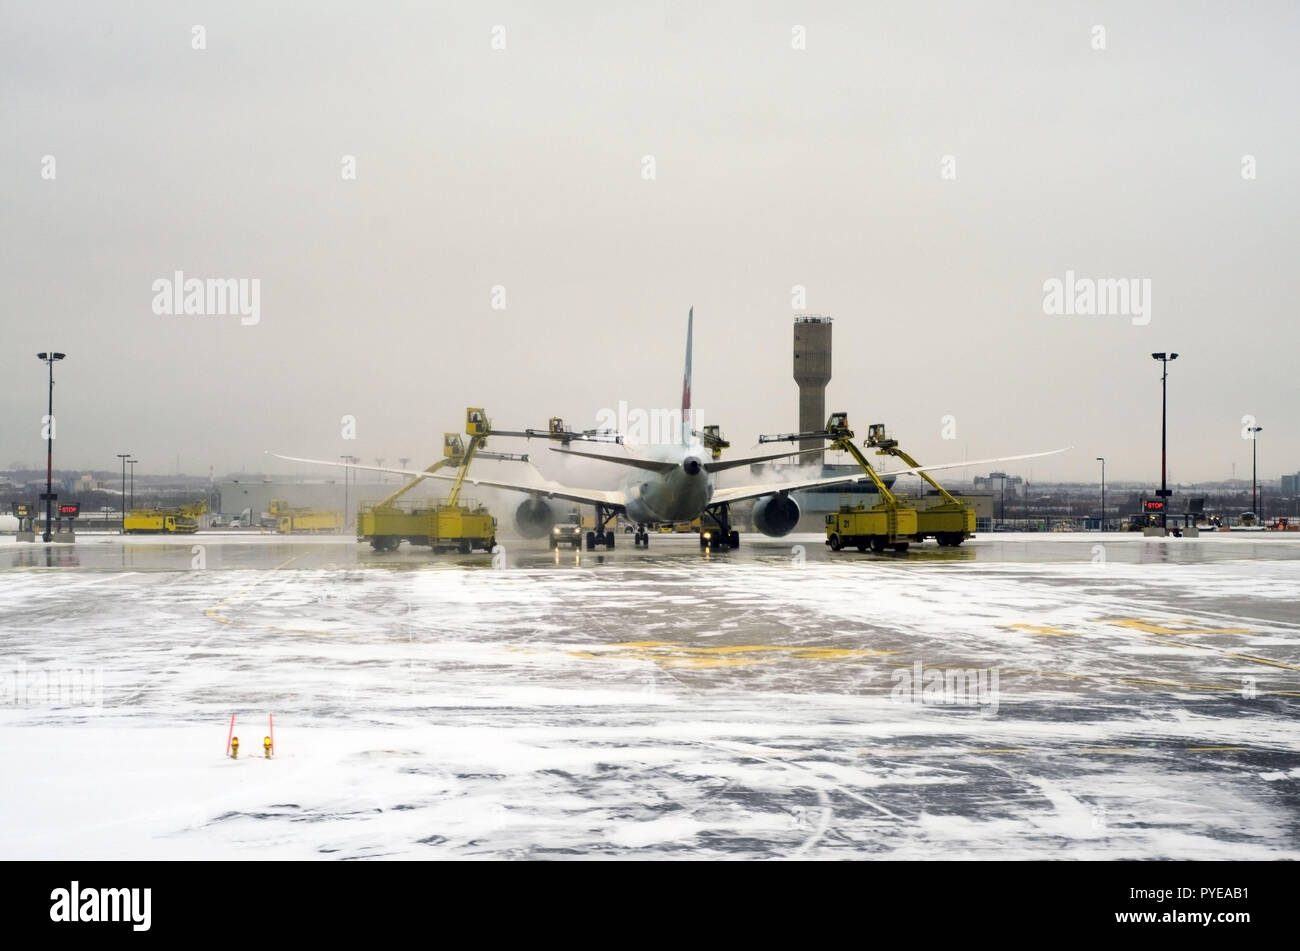 Planes are lining up on the snowy runway in Toronto airport (YYZ), the biggest de-icing station in the world, to get treated before take off. Stock Photo